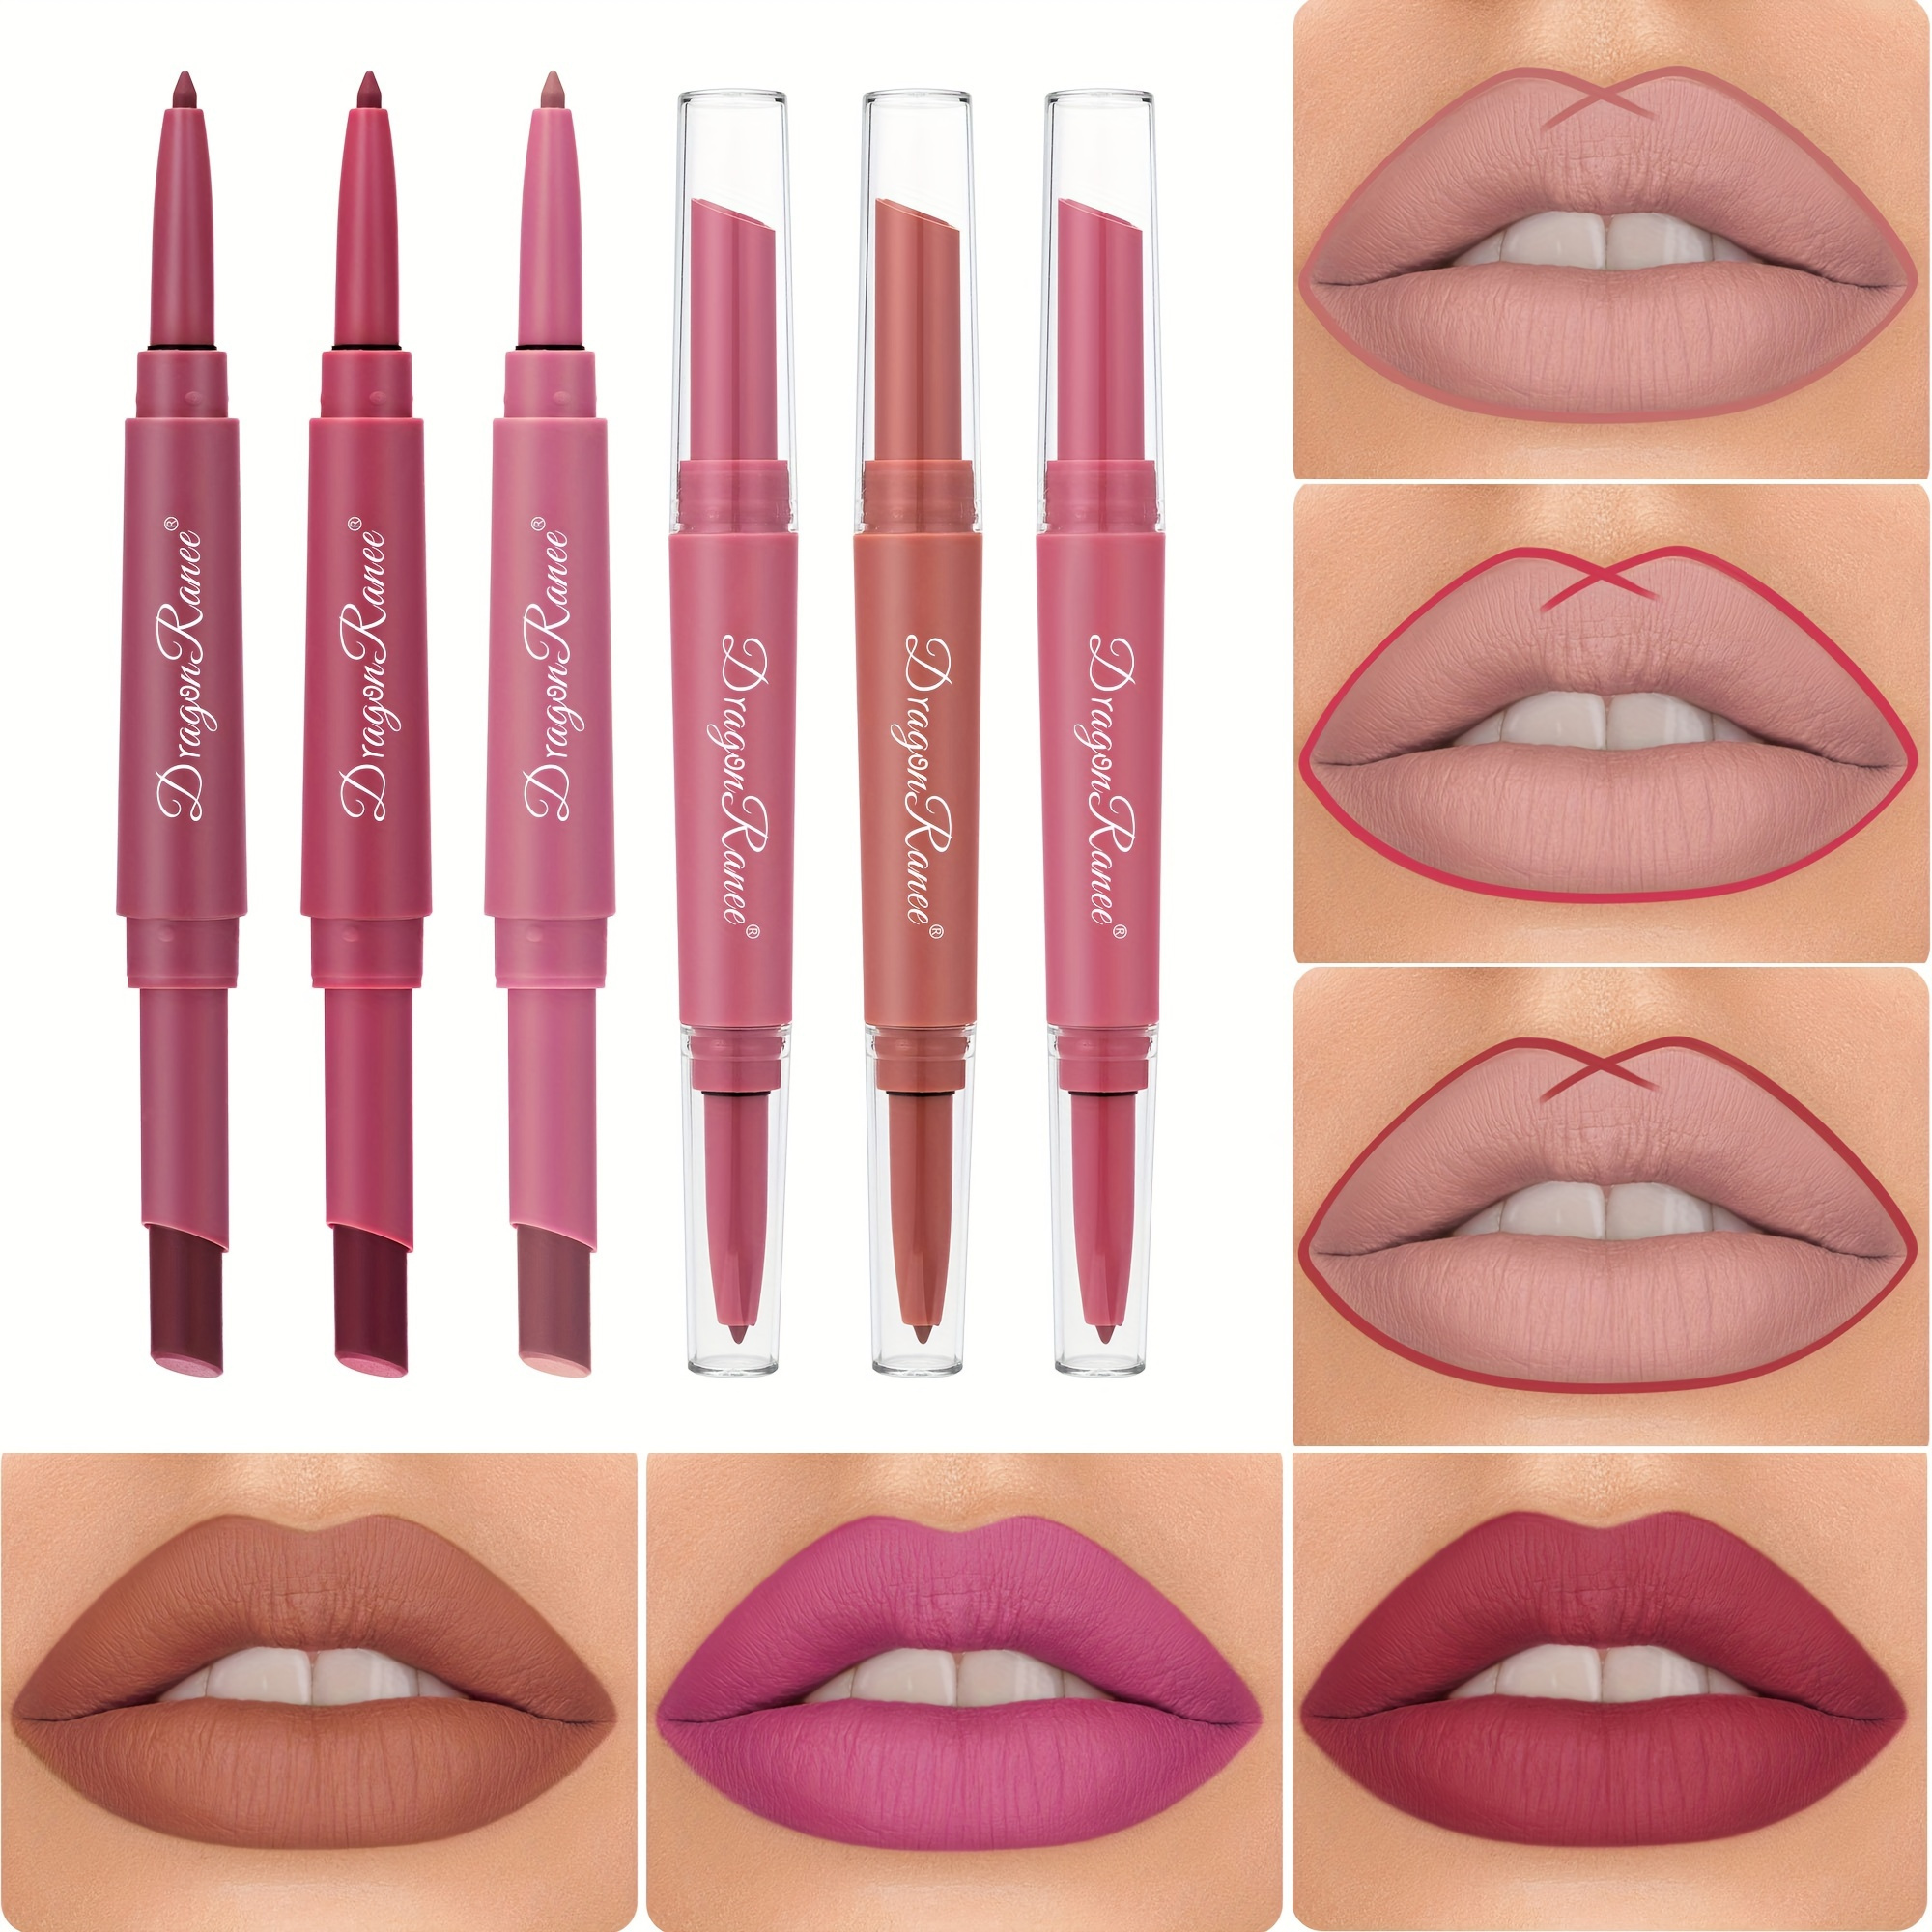 

Dual-ended Lip Liner & Lipstick, 2-in-1 Matte Finish & Long-lasting Formula, Smooth Application, Waterproof Makeup For Full Lip Coverage, Multiple Shades Contain Plant Squalane